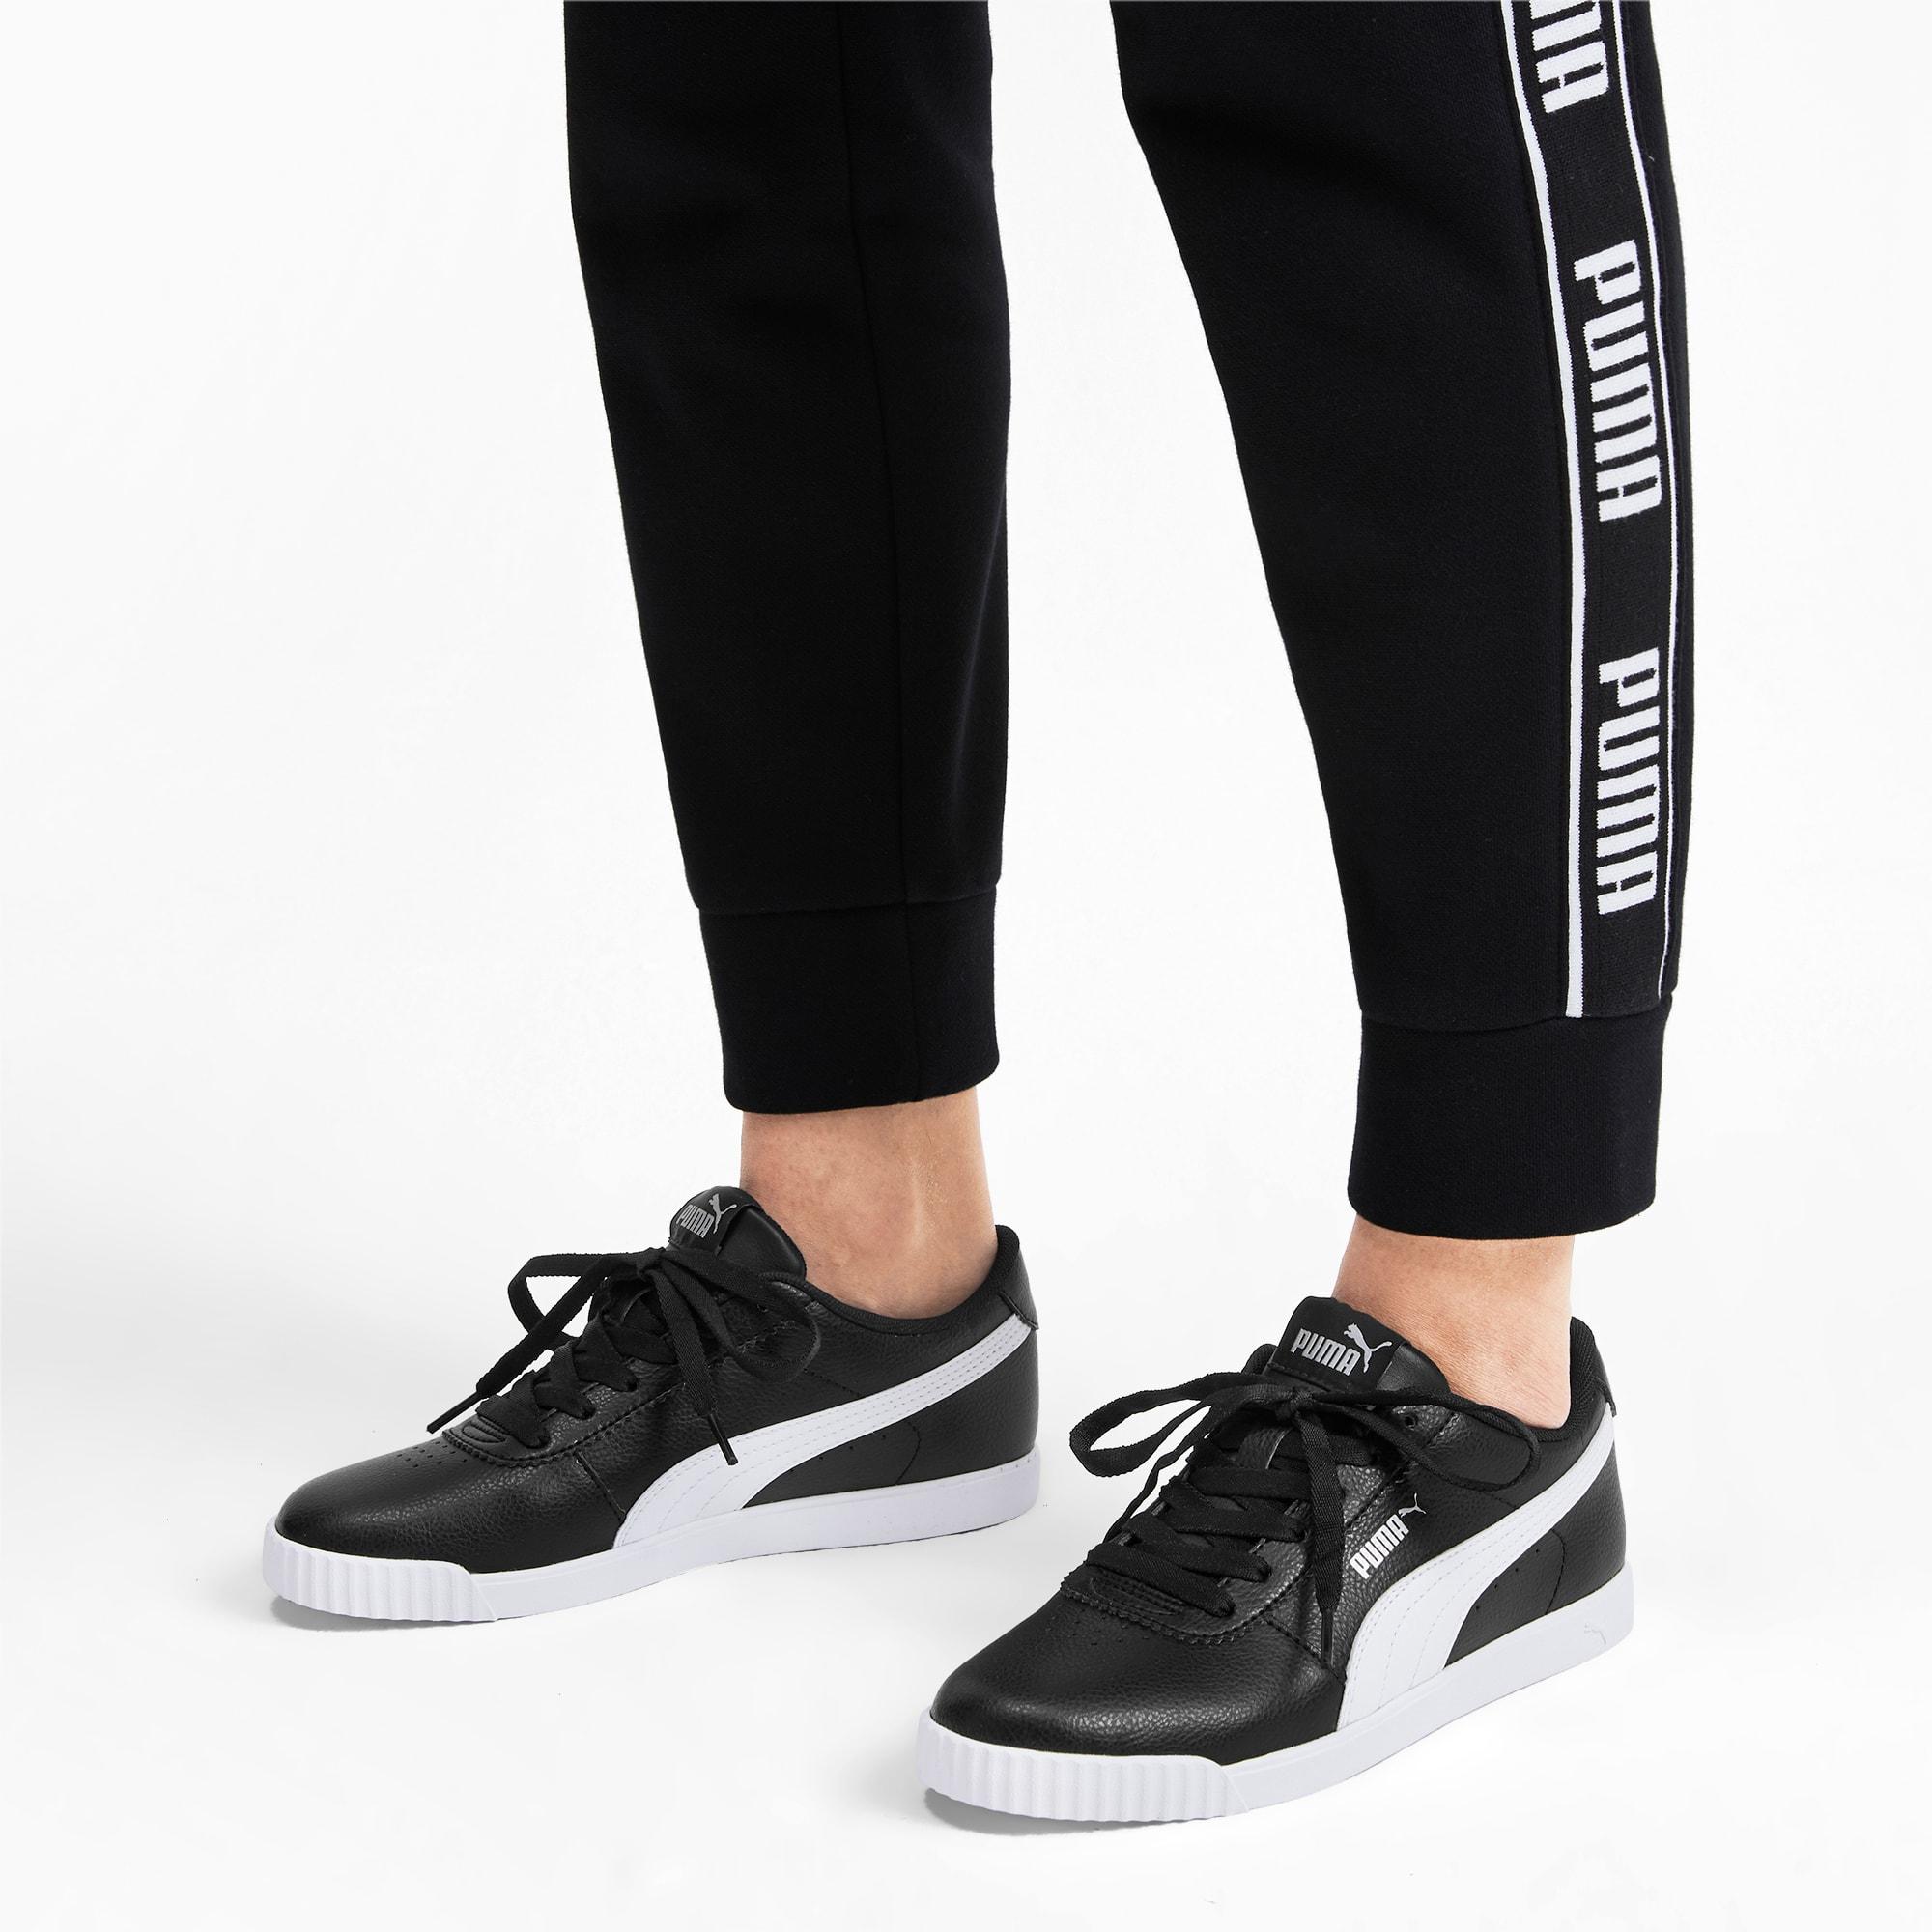 PUMA Synthetic Carina Slim Sneakers in Black - Lyst